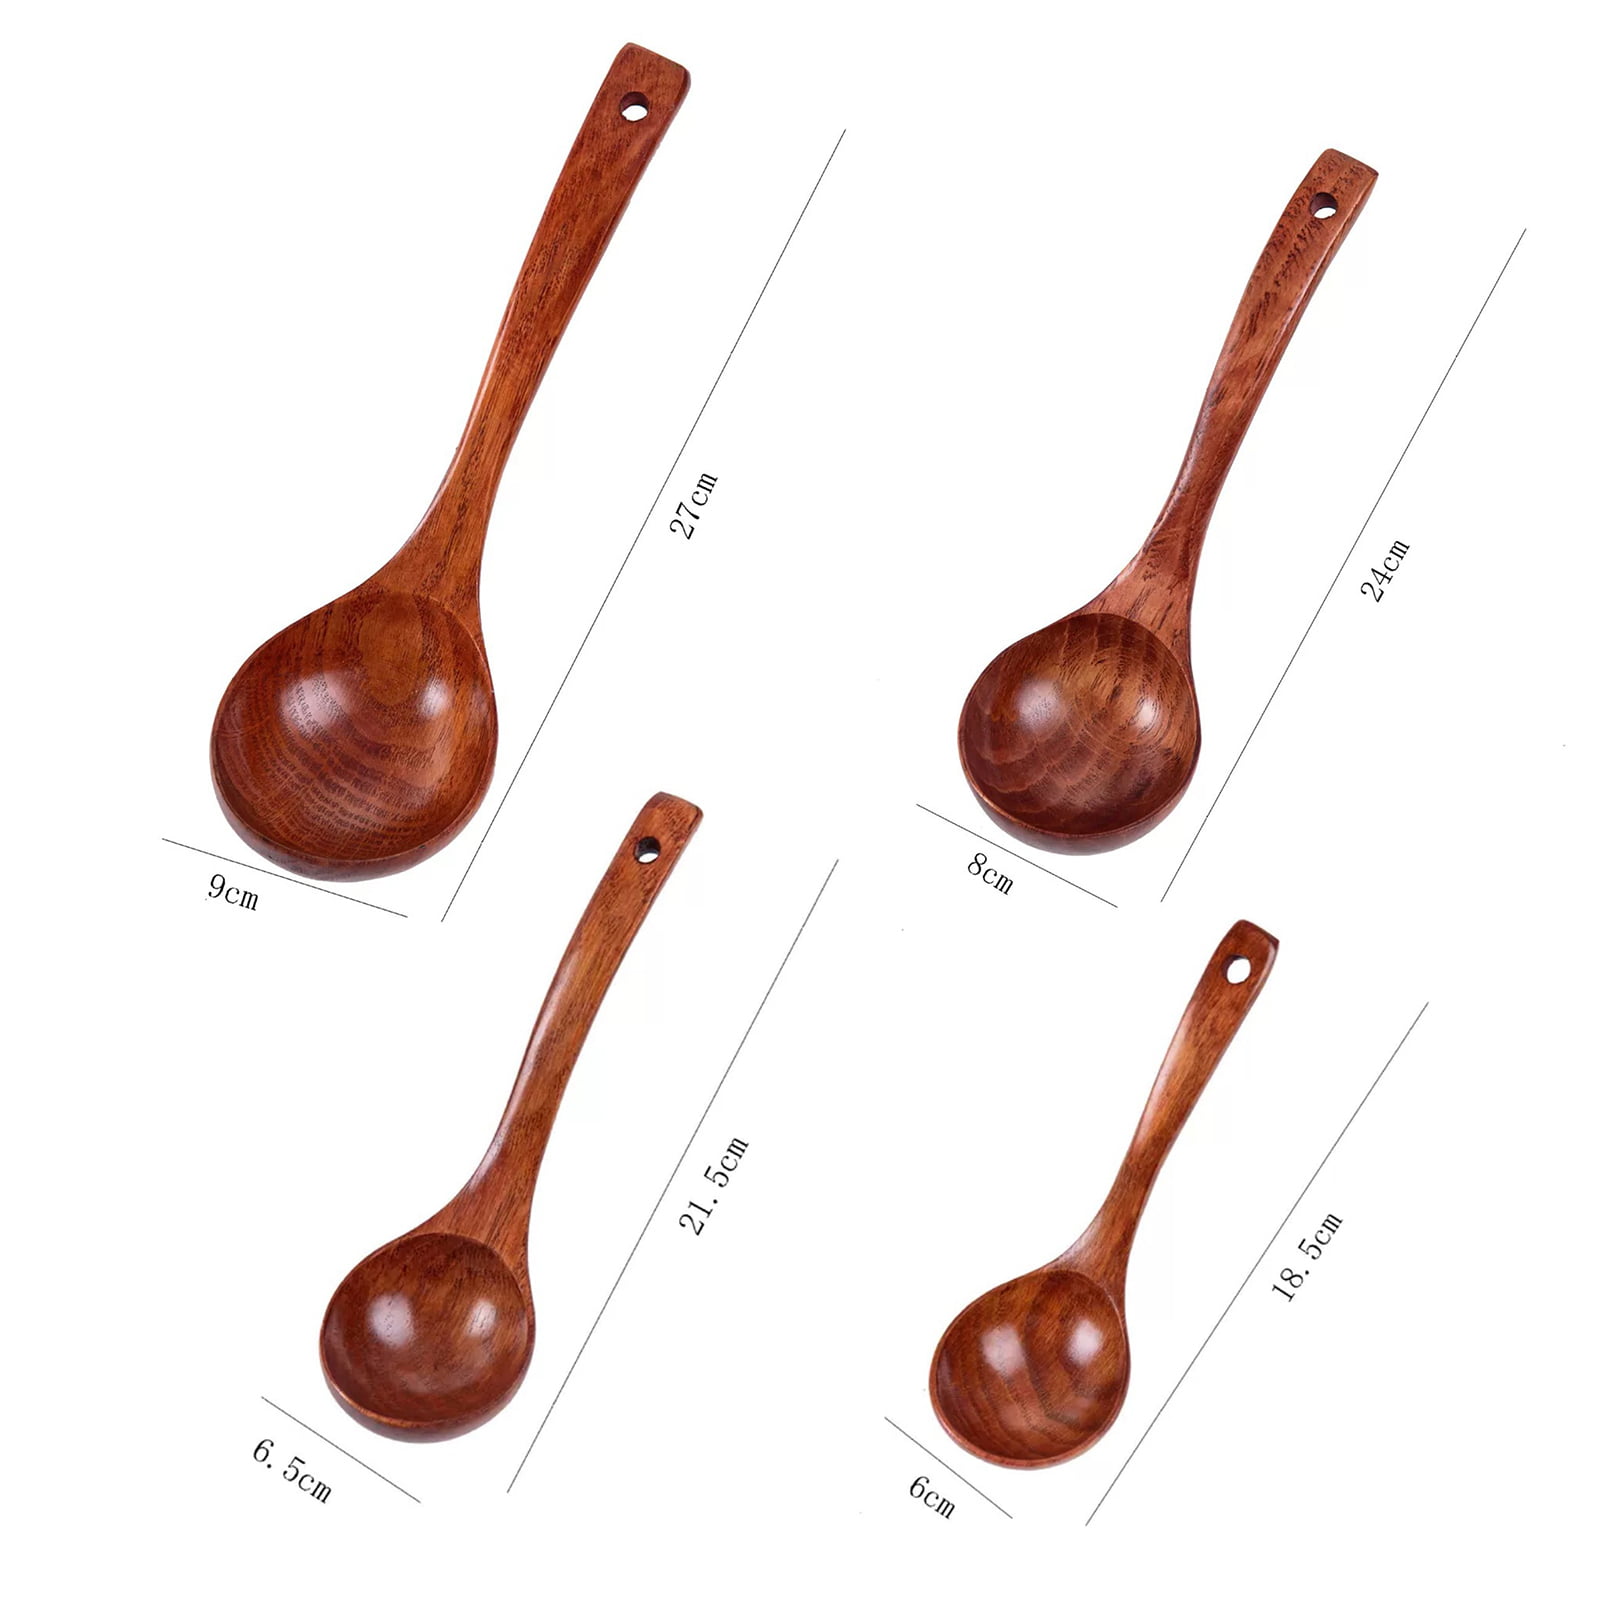 2 Pcs Wooden Spoon Ladle for Cooking Spoons-14 inch Long Kitchen Cooking  Spoon & 11 inch Best Wood Spoons Large Deep Serving Spoons Soup Ladles Set